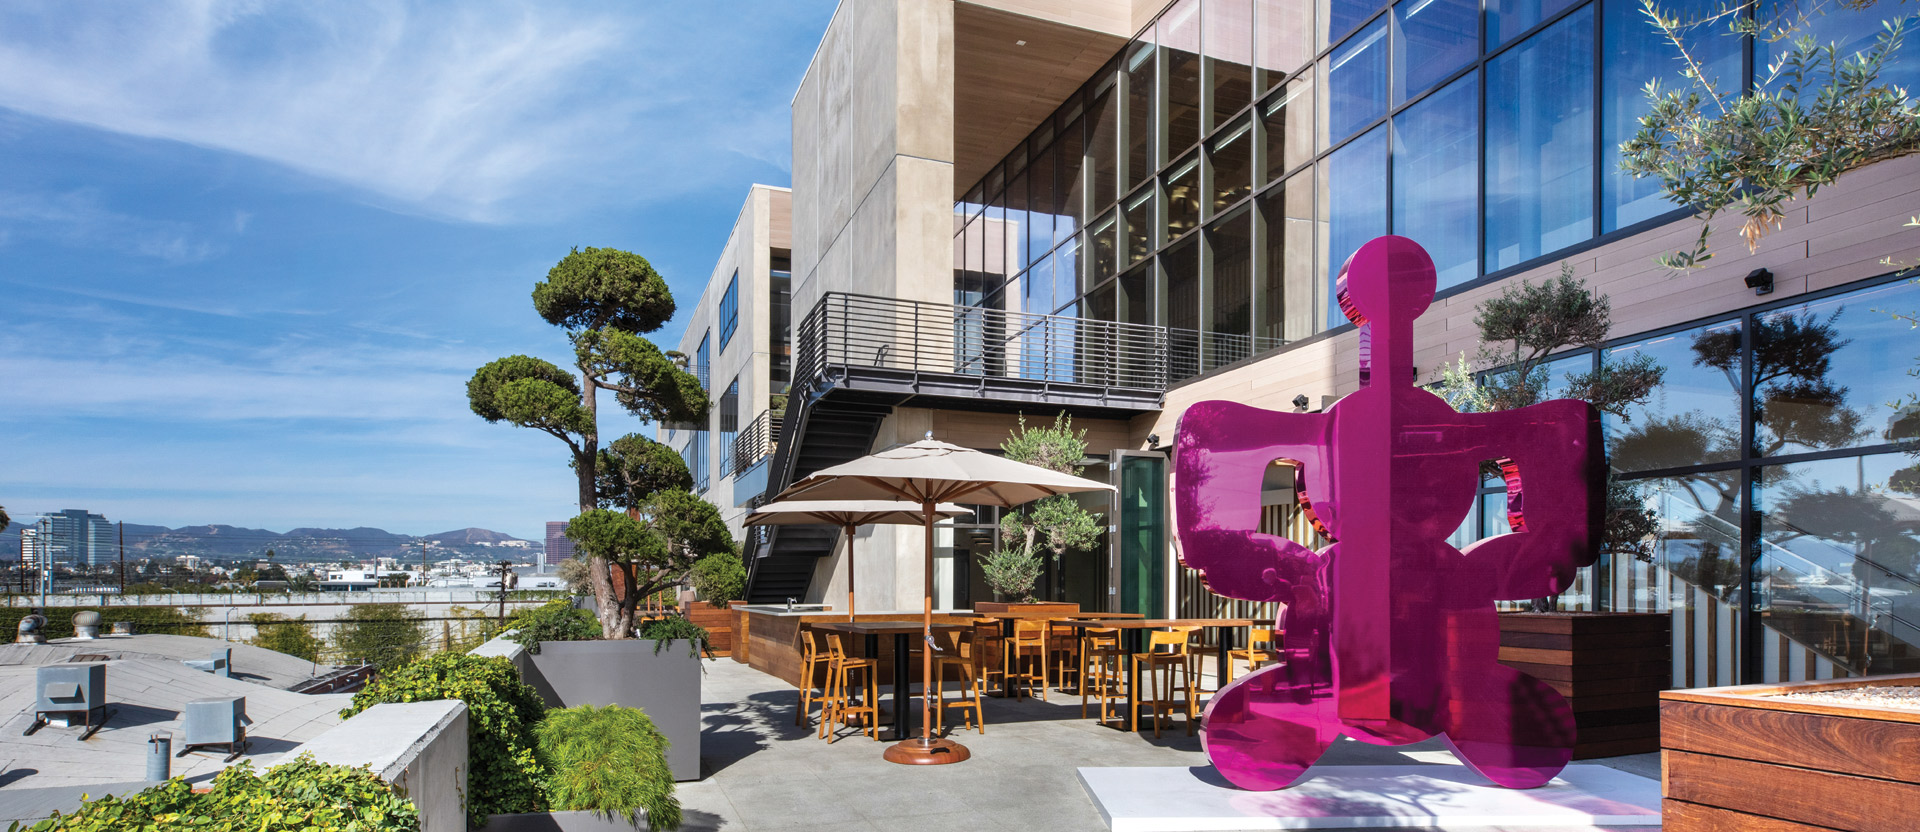 Rooftop terrace with modern outdoor furniture set against a backdrop of architectural glass and clean-lined structures. Purple abstract sculpture adds a pop of color, with greenery accentuating the urban landscape view.